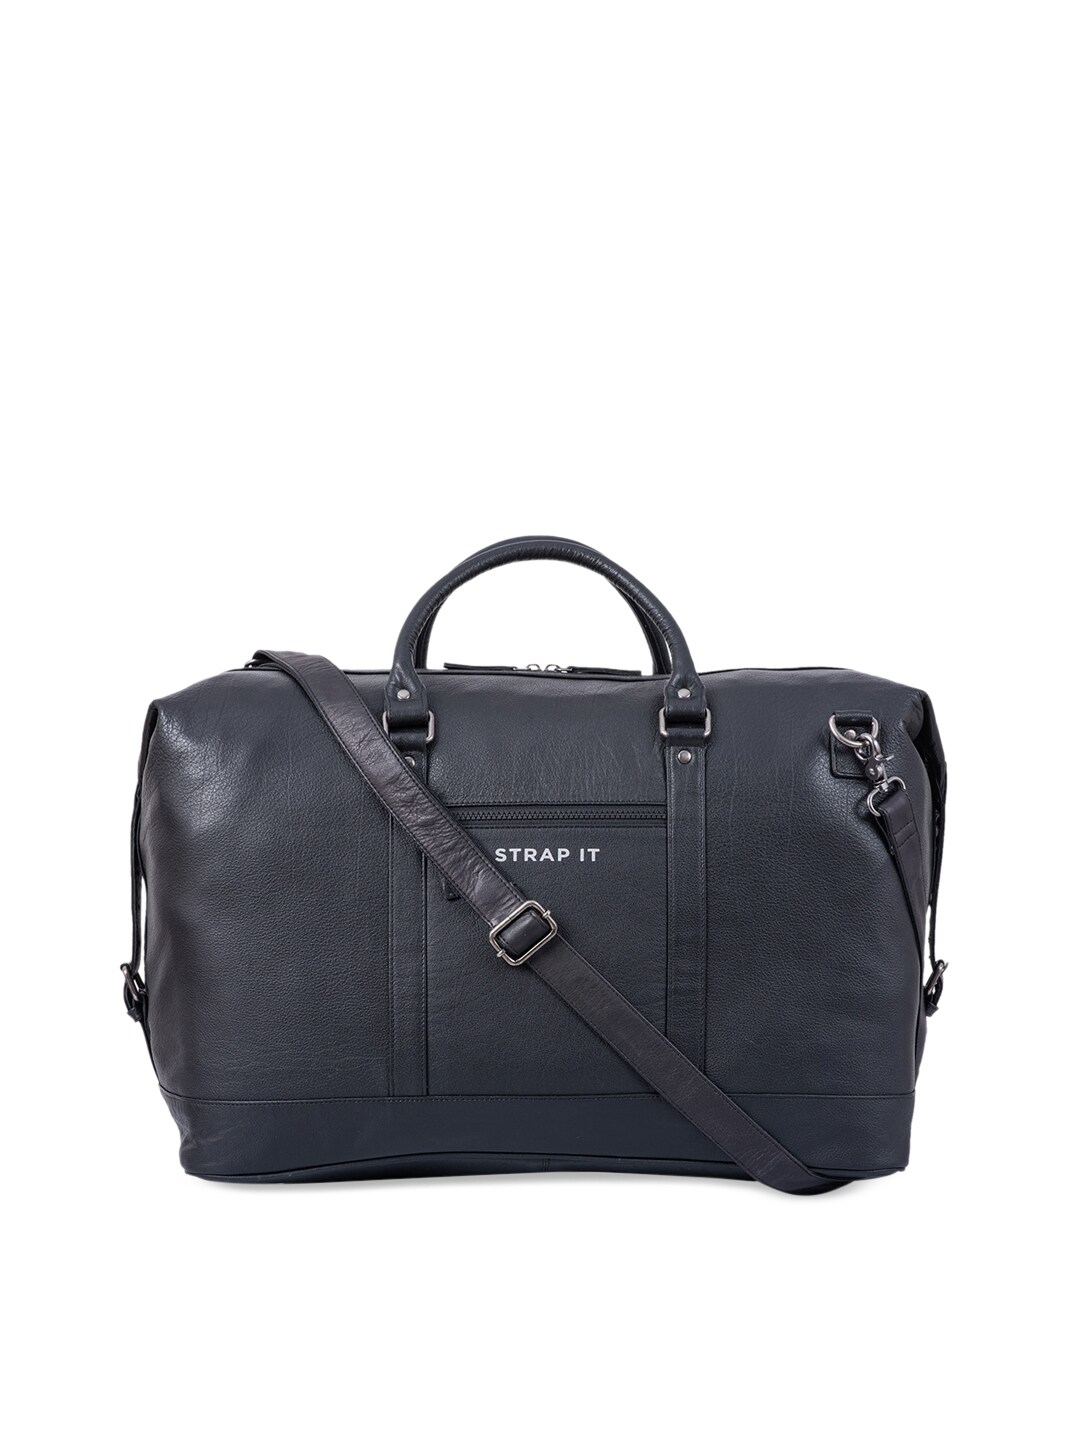 STRAP IT Black Solid Large Duffel Bag Price in India